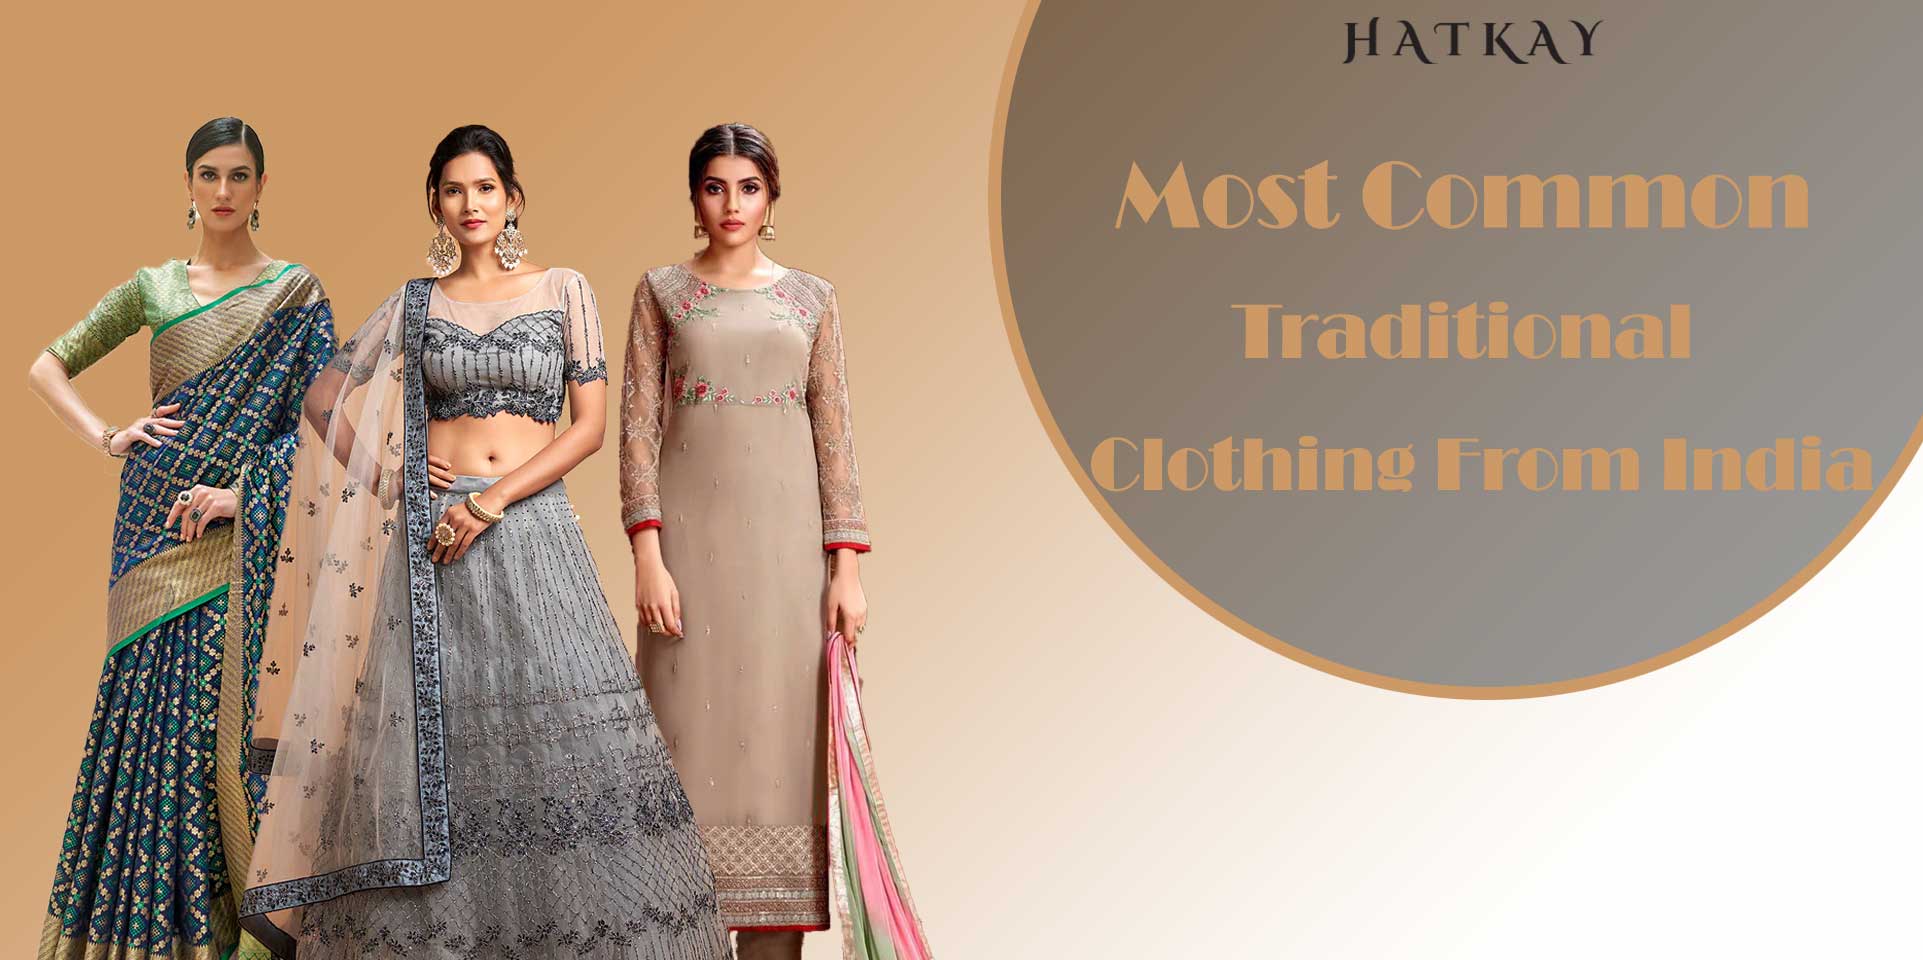 What is the Most Common Traditional Clothing from India?